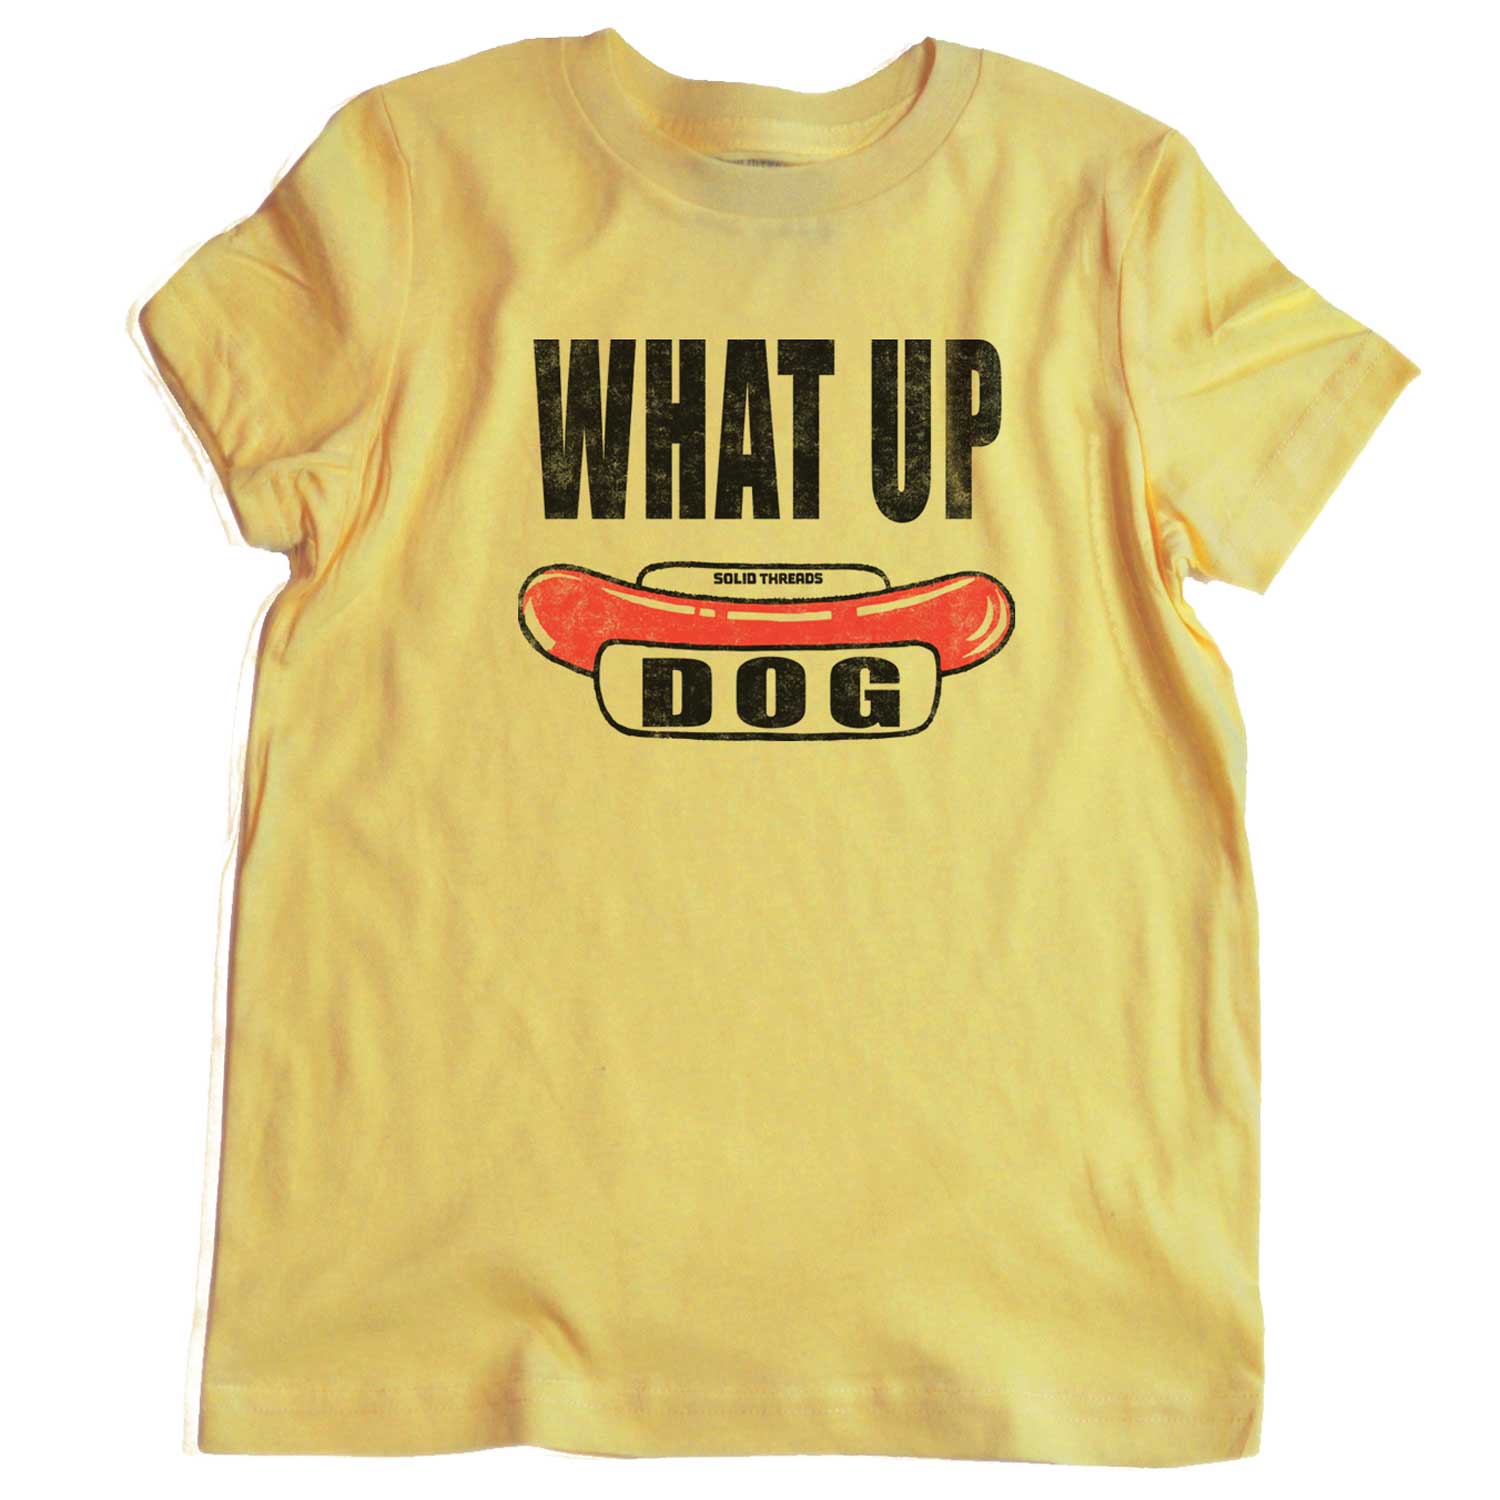 Kid's What Up Dog Graphic Tee | Funny Hot Dog T-Shirt Yellow / Age 4